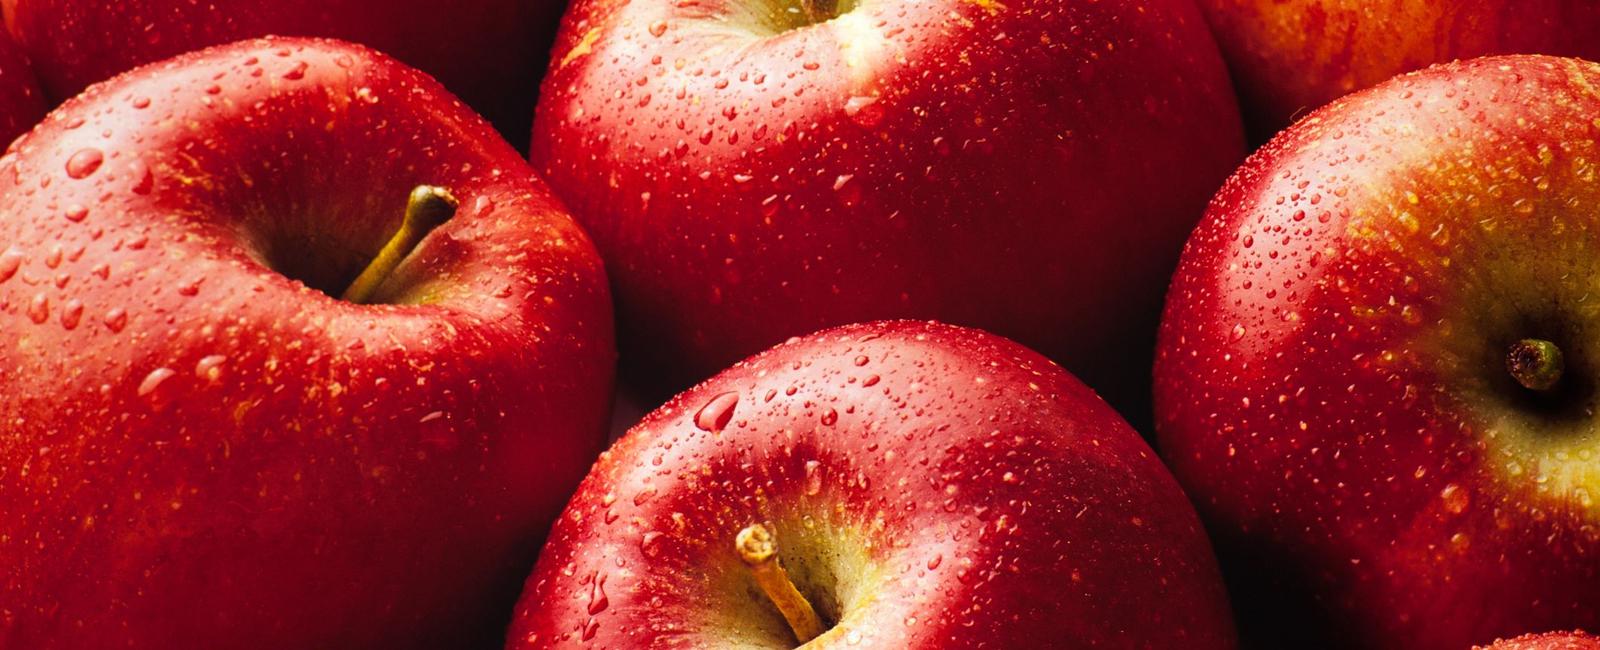 A fresh apple is made up of about 25 air